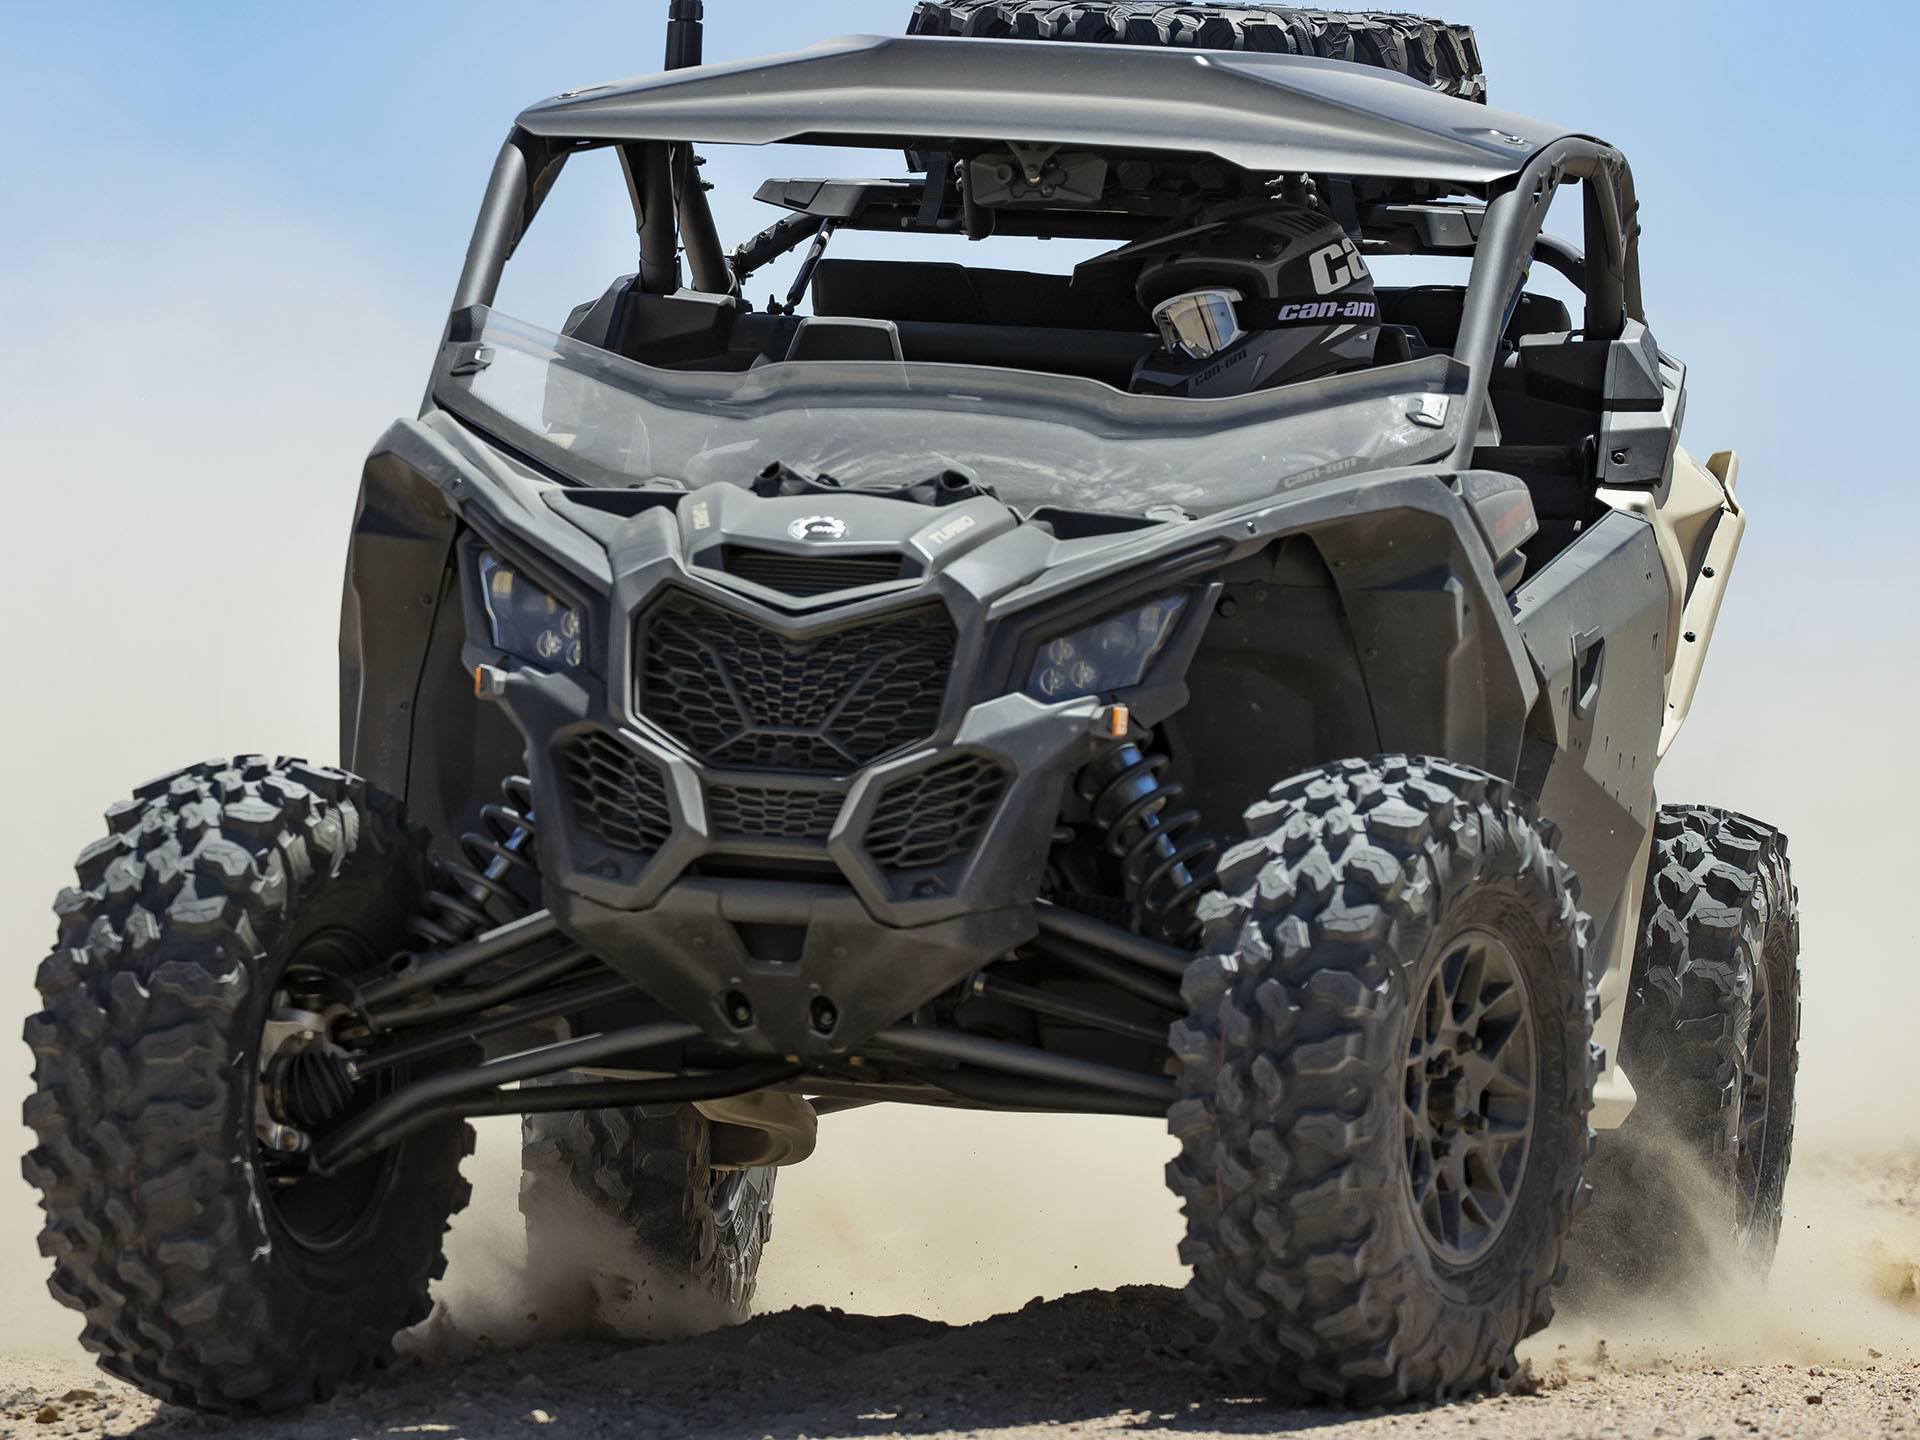 2022 Can-Am Maverick X3 DS Turbo in Dyersburg, Tennessee